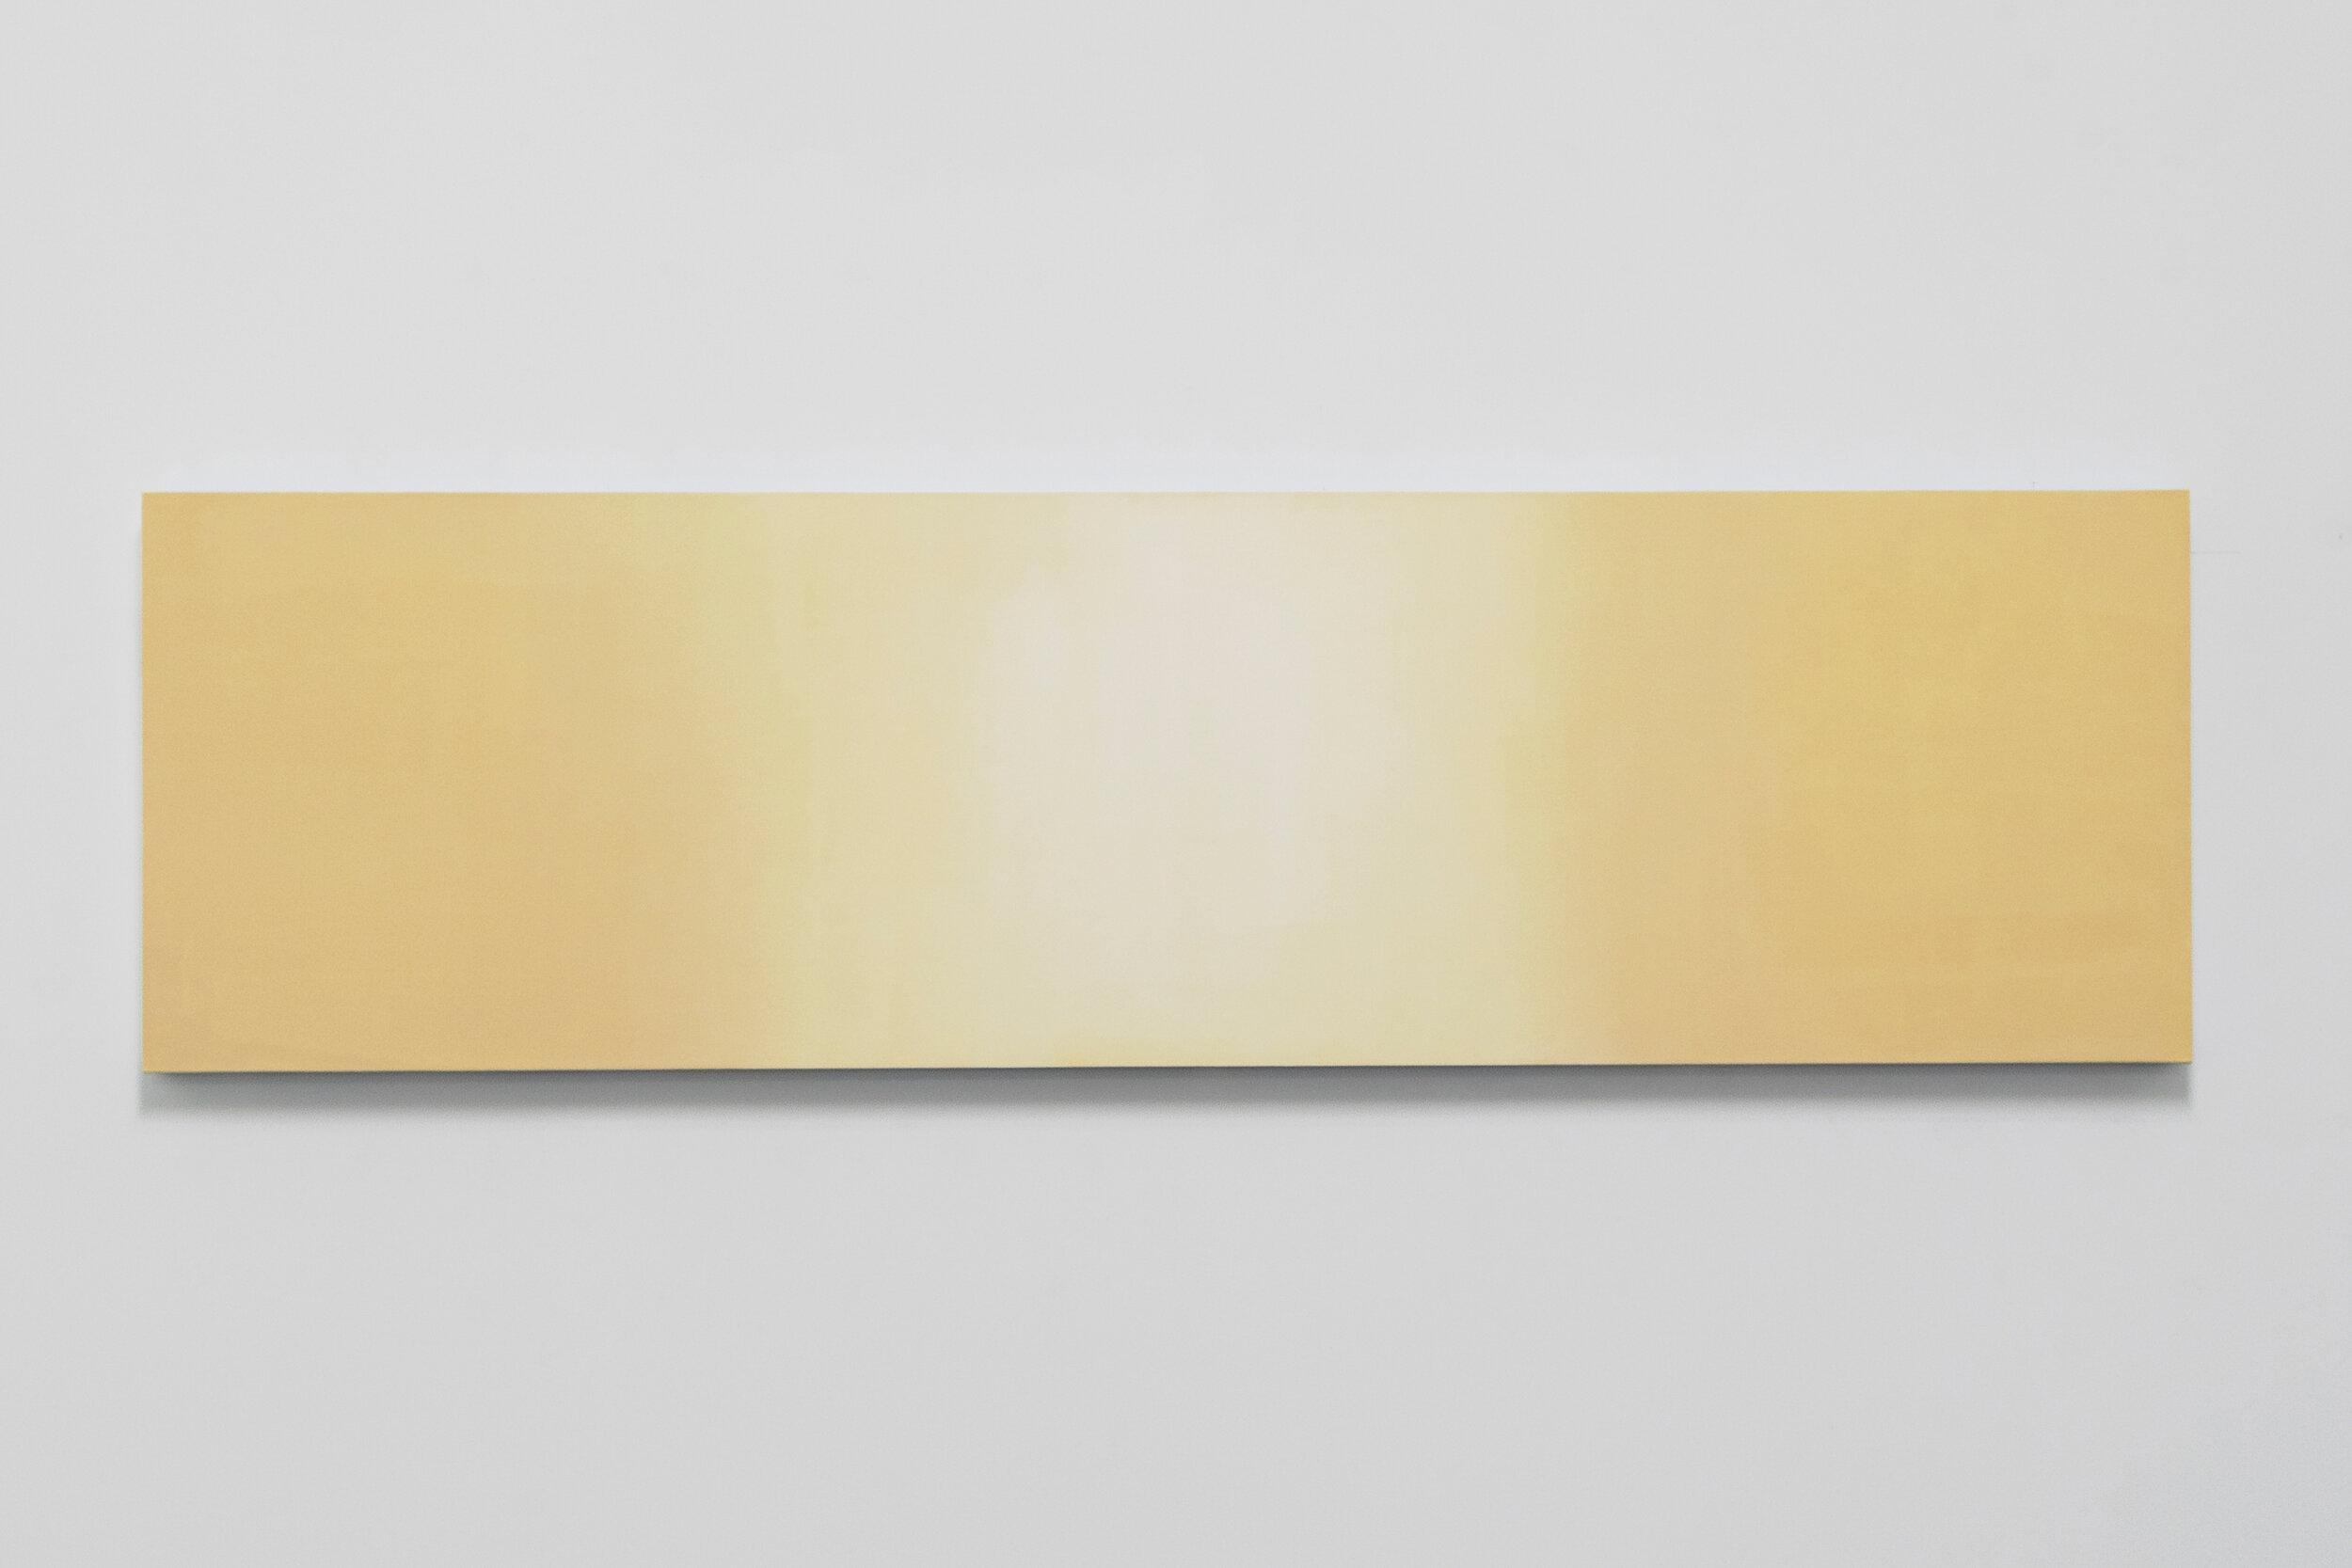 Solis, 2020, Oil on Canvas, 27 x 96 inches